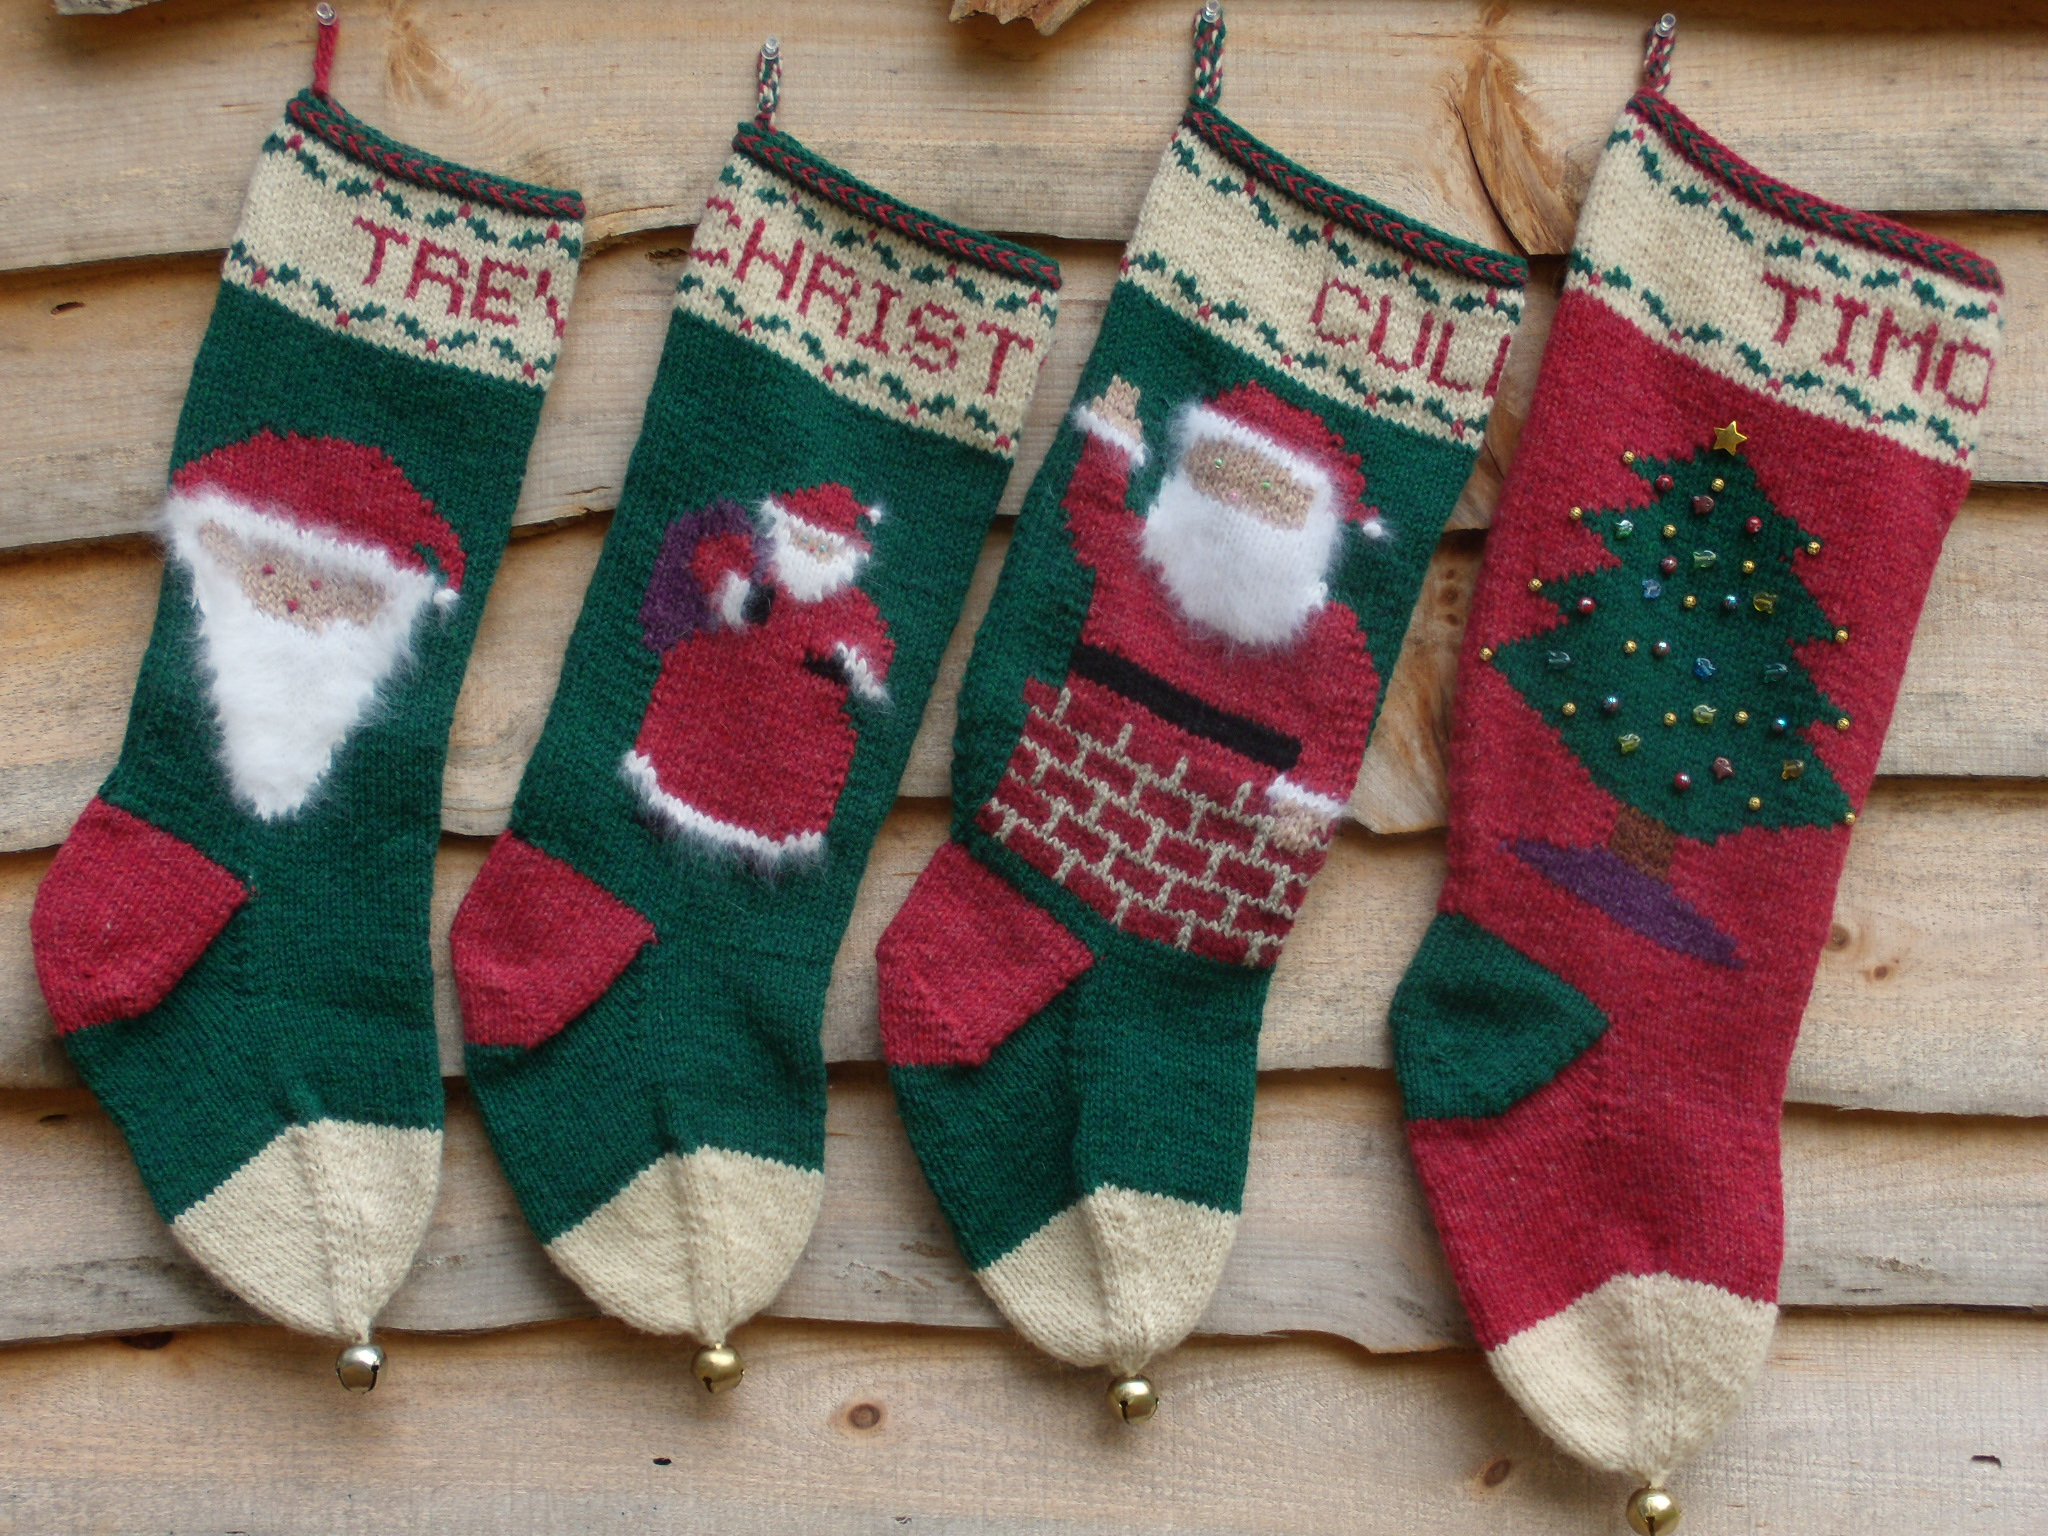 Knitted Christmas Stocking Patterns Personalized Who Made Your Christmas Stockings Halcyon Yarn Blog Halcyon Yarn